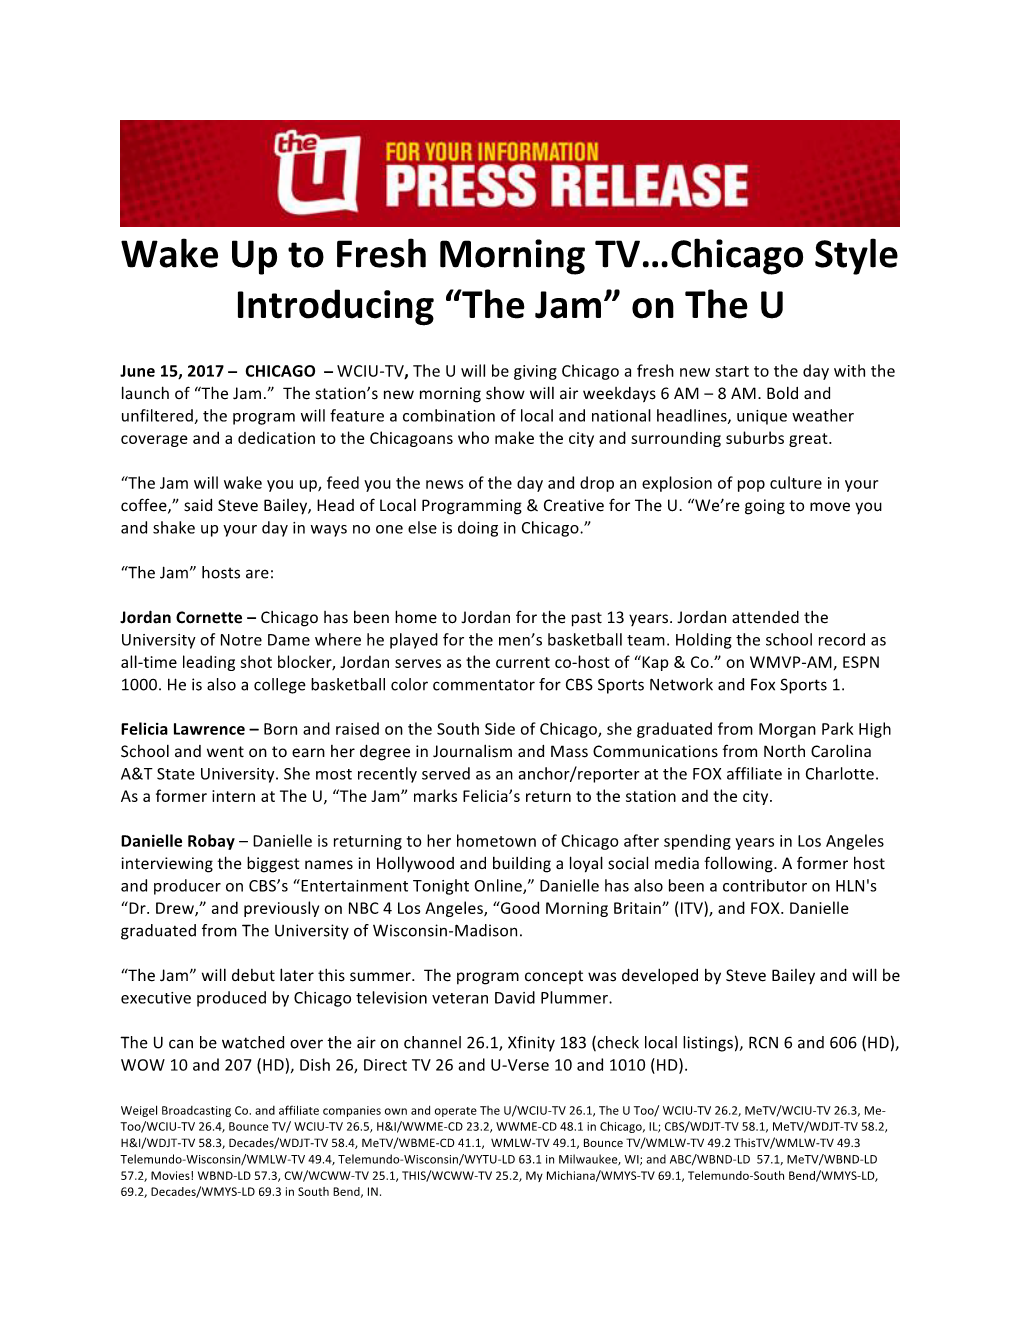 Wake up to Fresh Morning TV…Chicago Style Introducing “The Jam” on the U